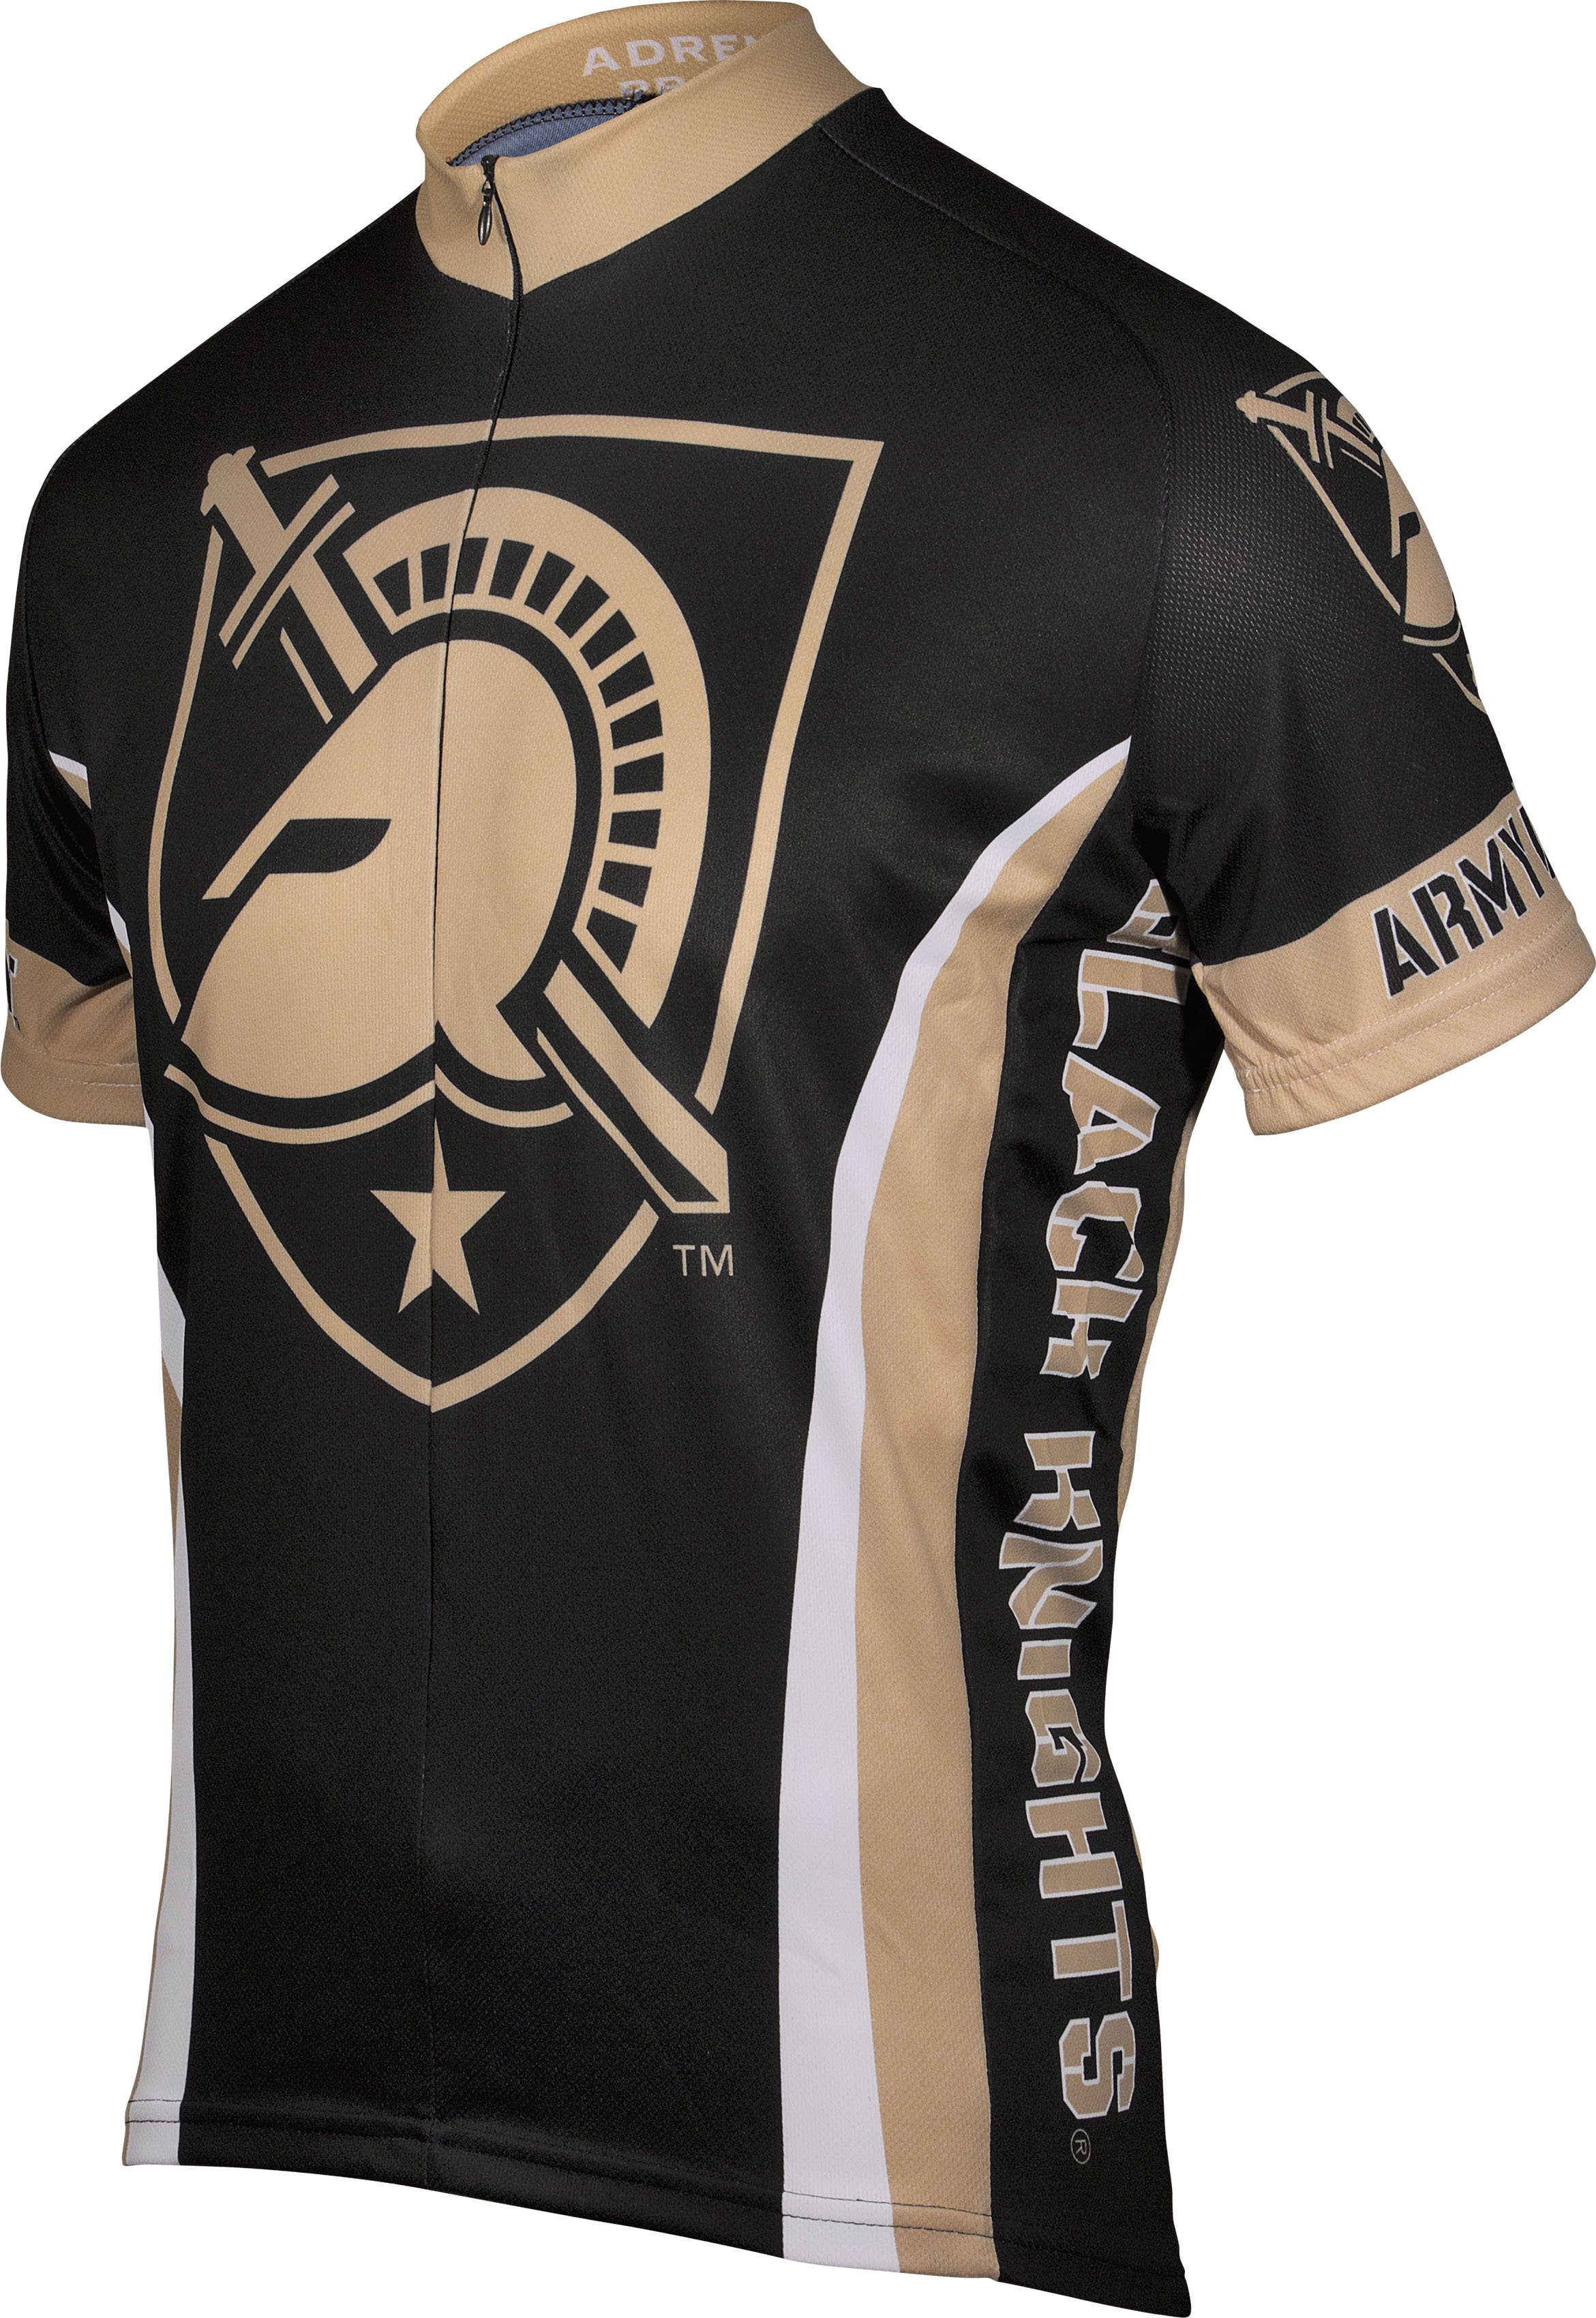 West Point Military Academy ARMY Cycling Jersey